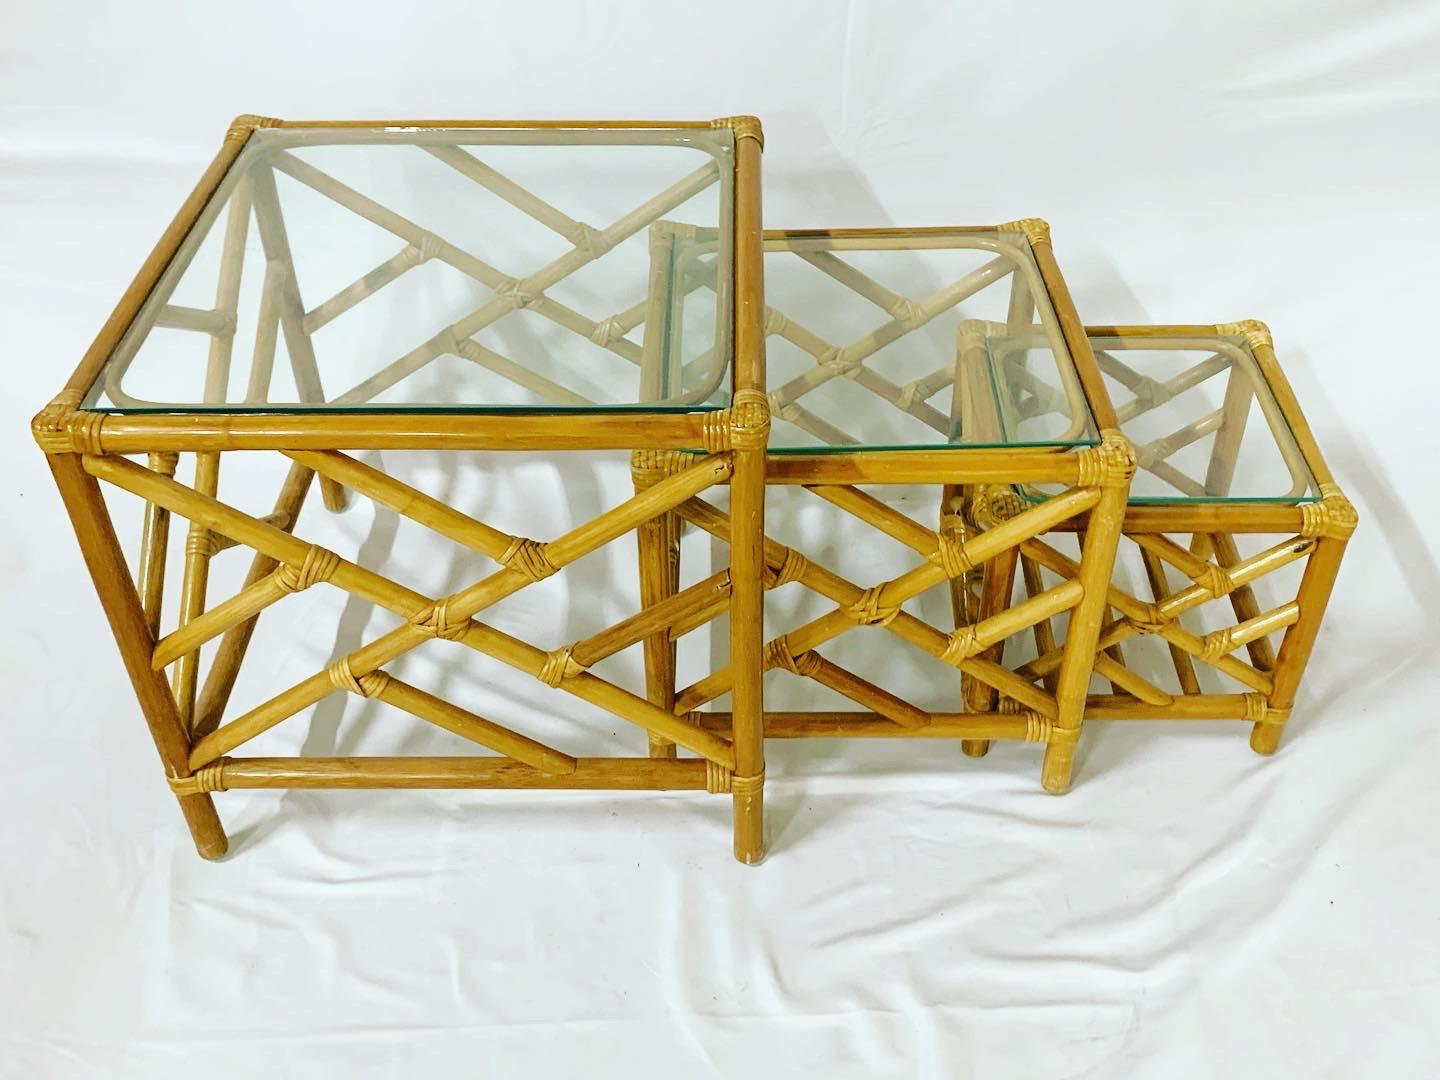 Bamboo rattan nesting tables with Chinese chippendale design and glass tops. These are three tables in total which nest perfect within each other.
Largest table measures: 22”x22” with a height of 21”
Middle table: 17”x17” with a height of